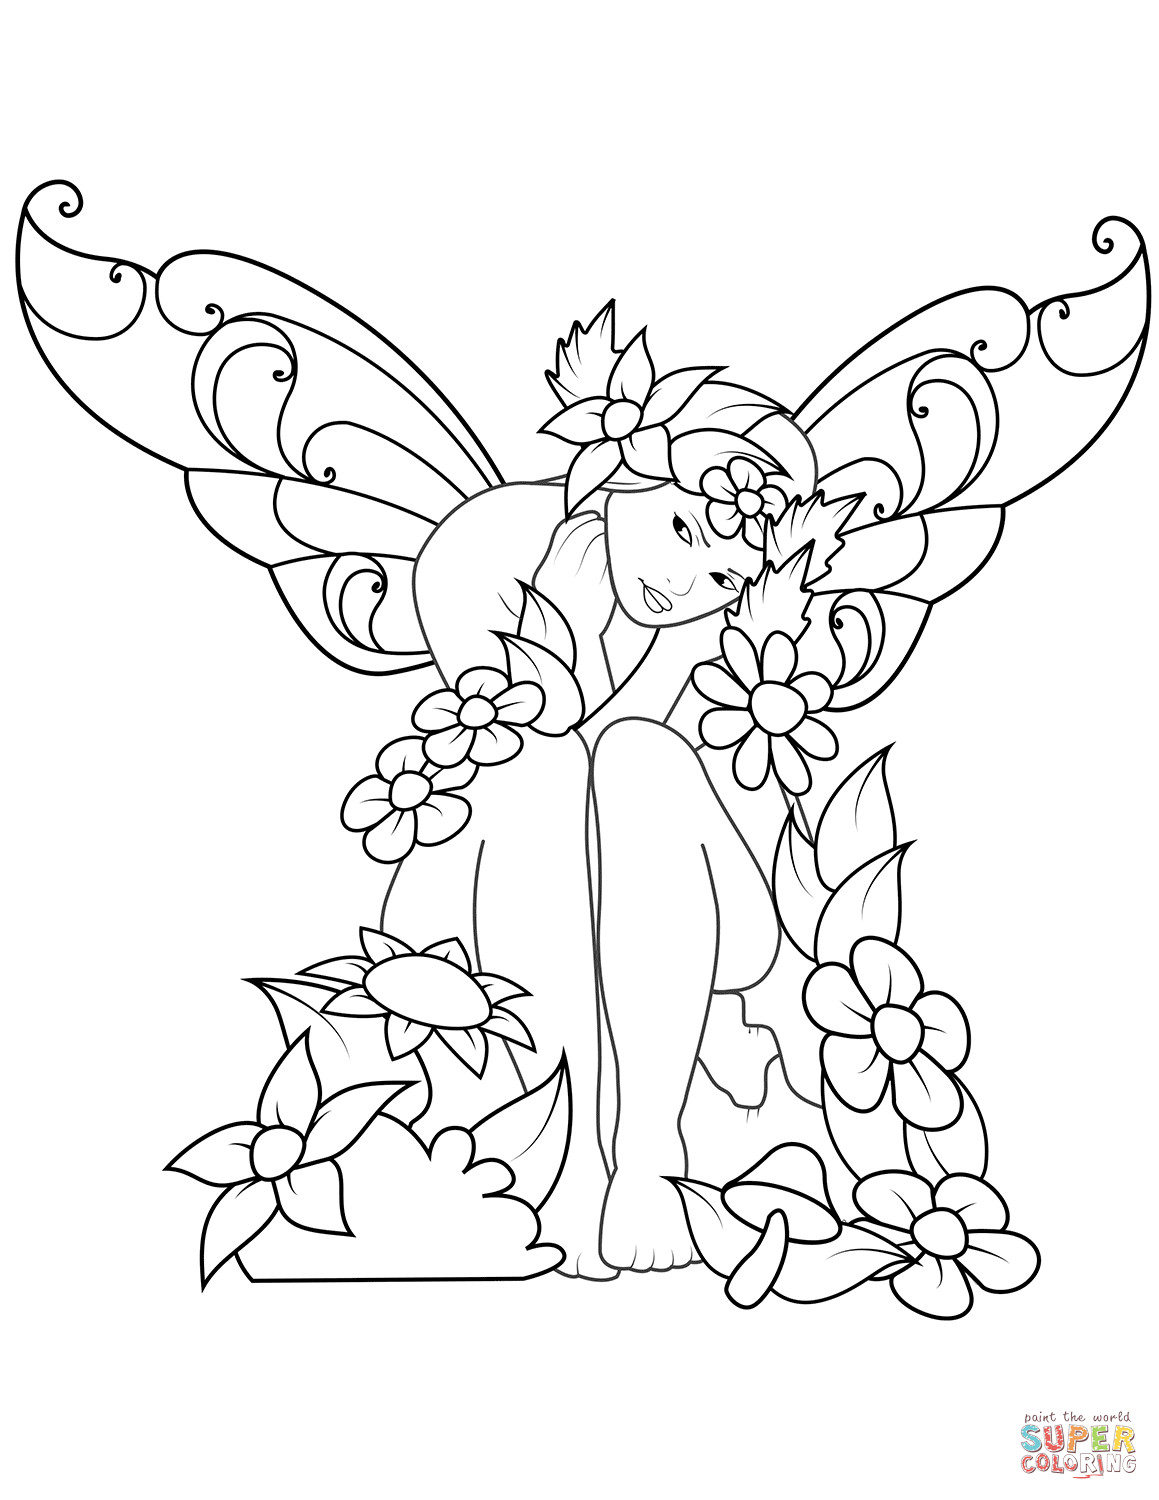 Faery Coloring Pages
 Sad Fairy coloring page